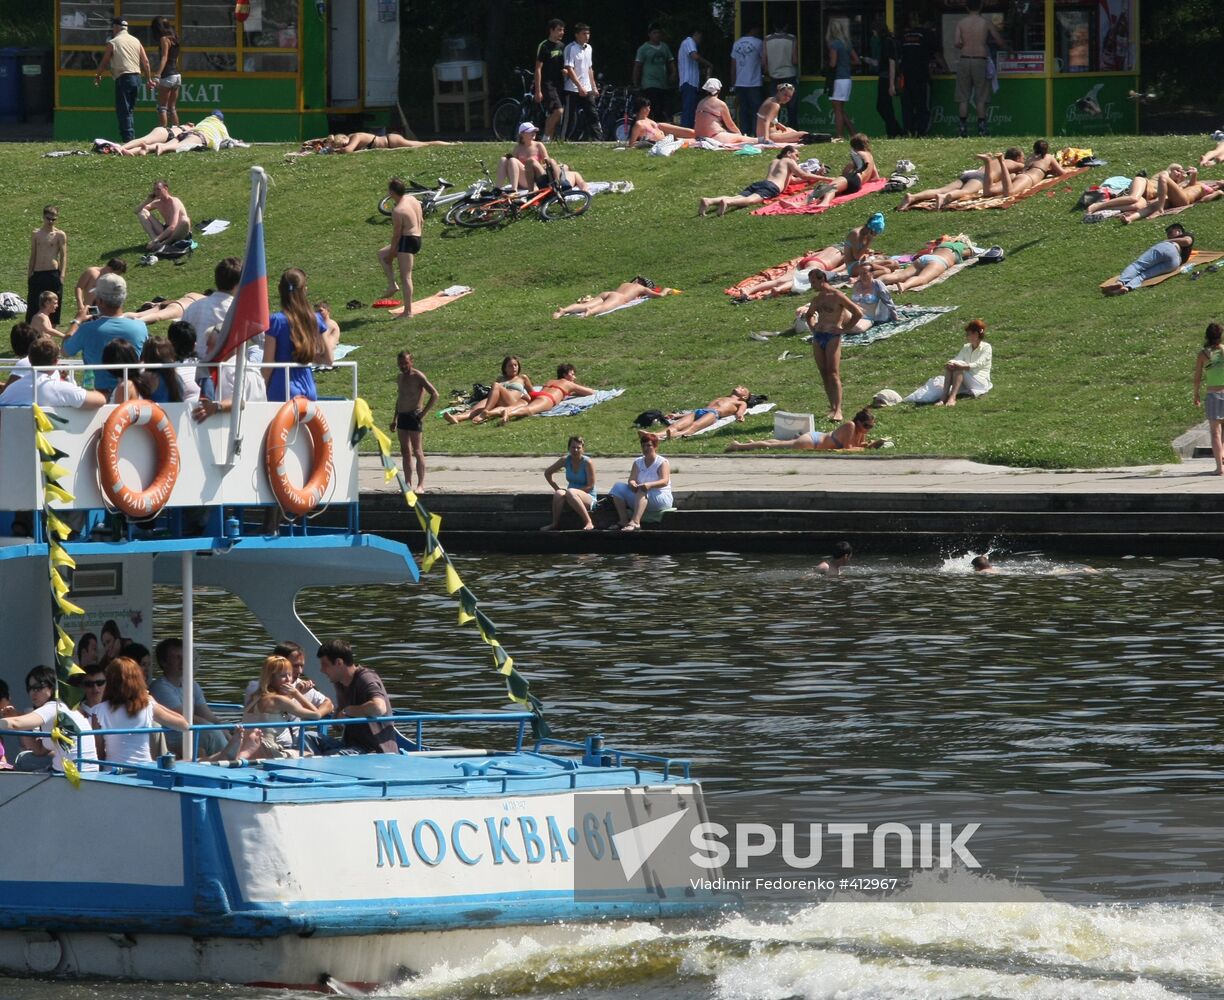 People relaxing in Moscow